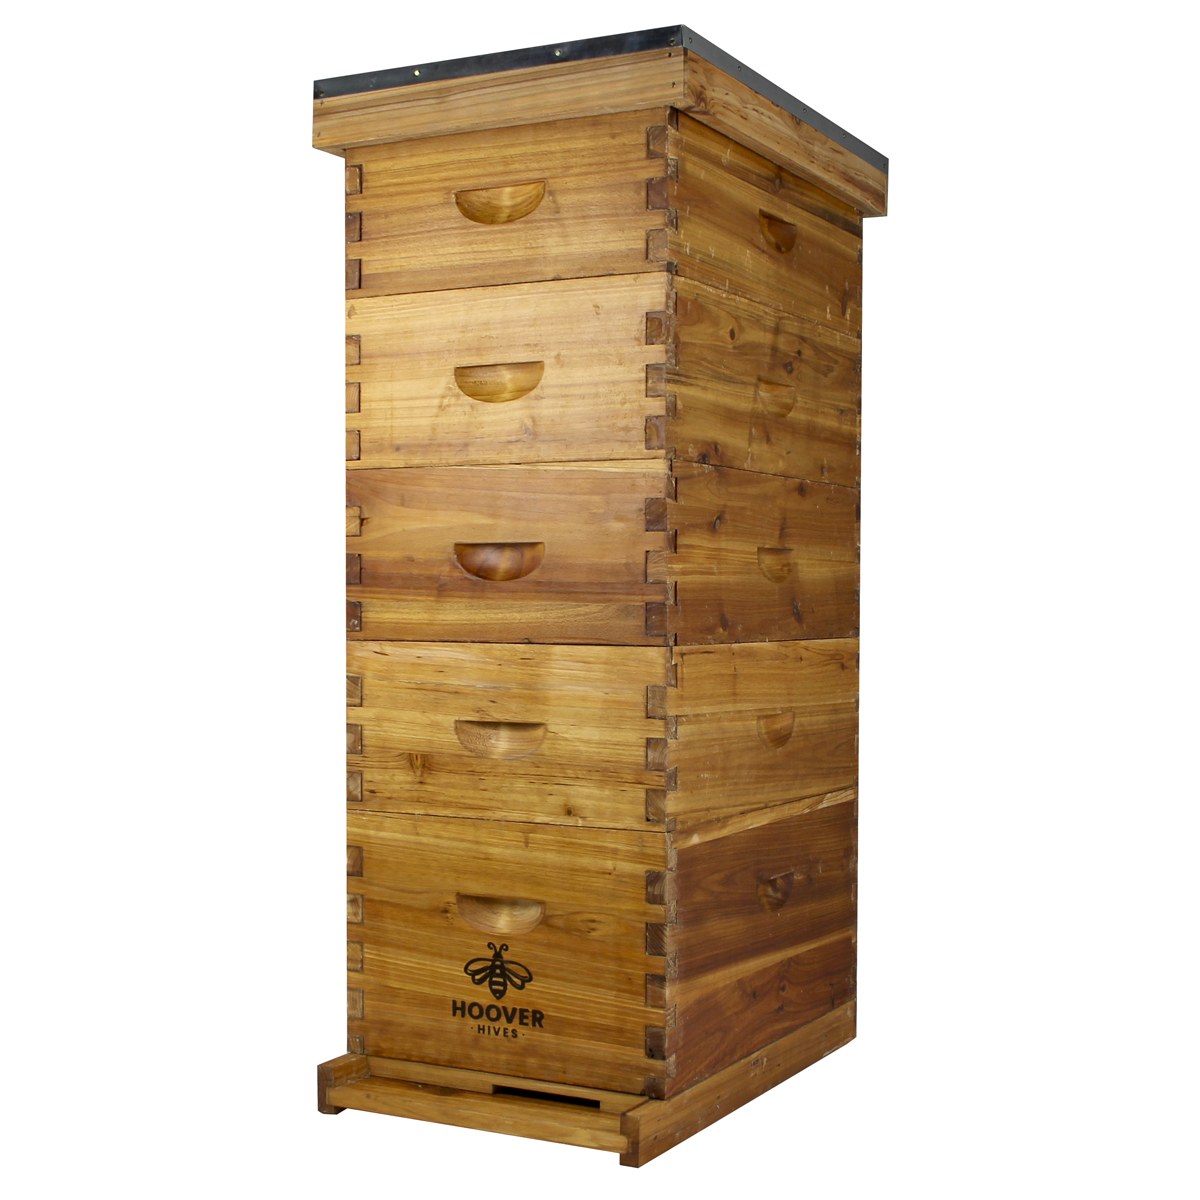 Hoover Hives Wax Coated 8 Frame Beehive With 1 Deep Bee Box & 4 Medium Bee Boxes